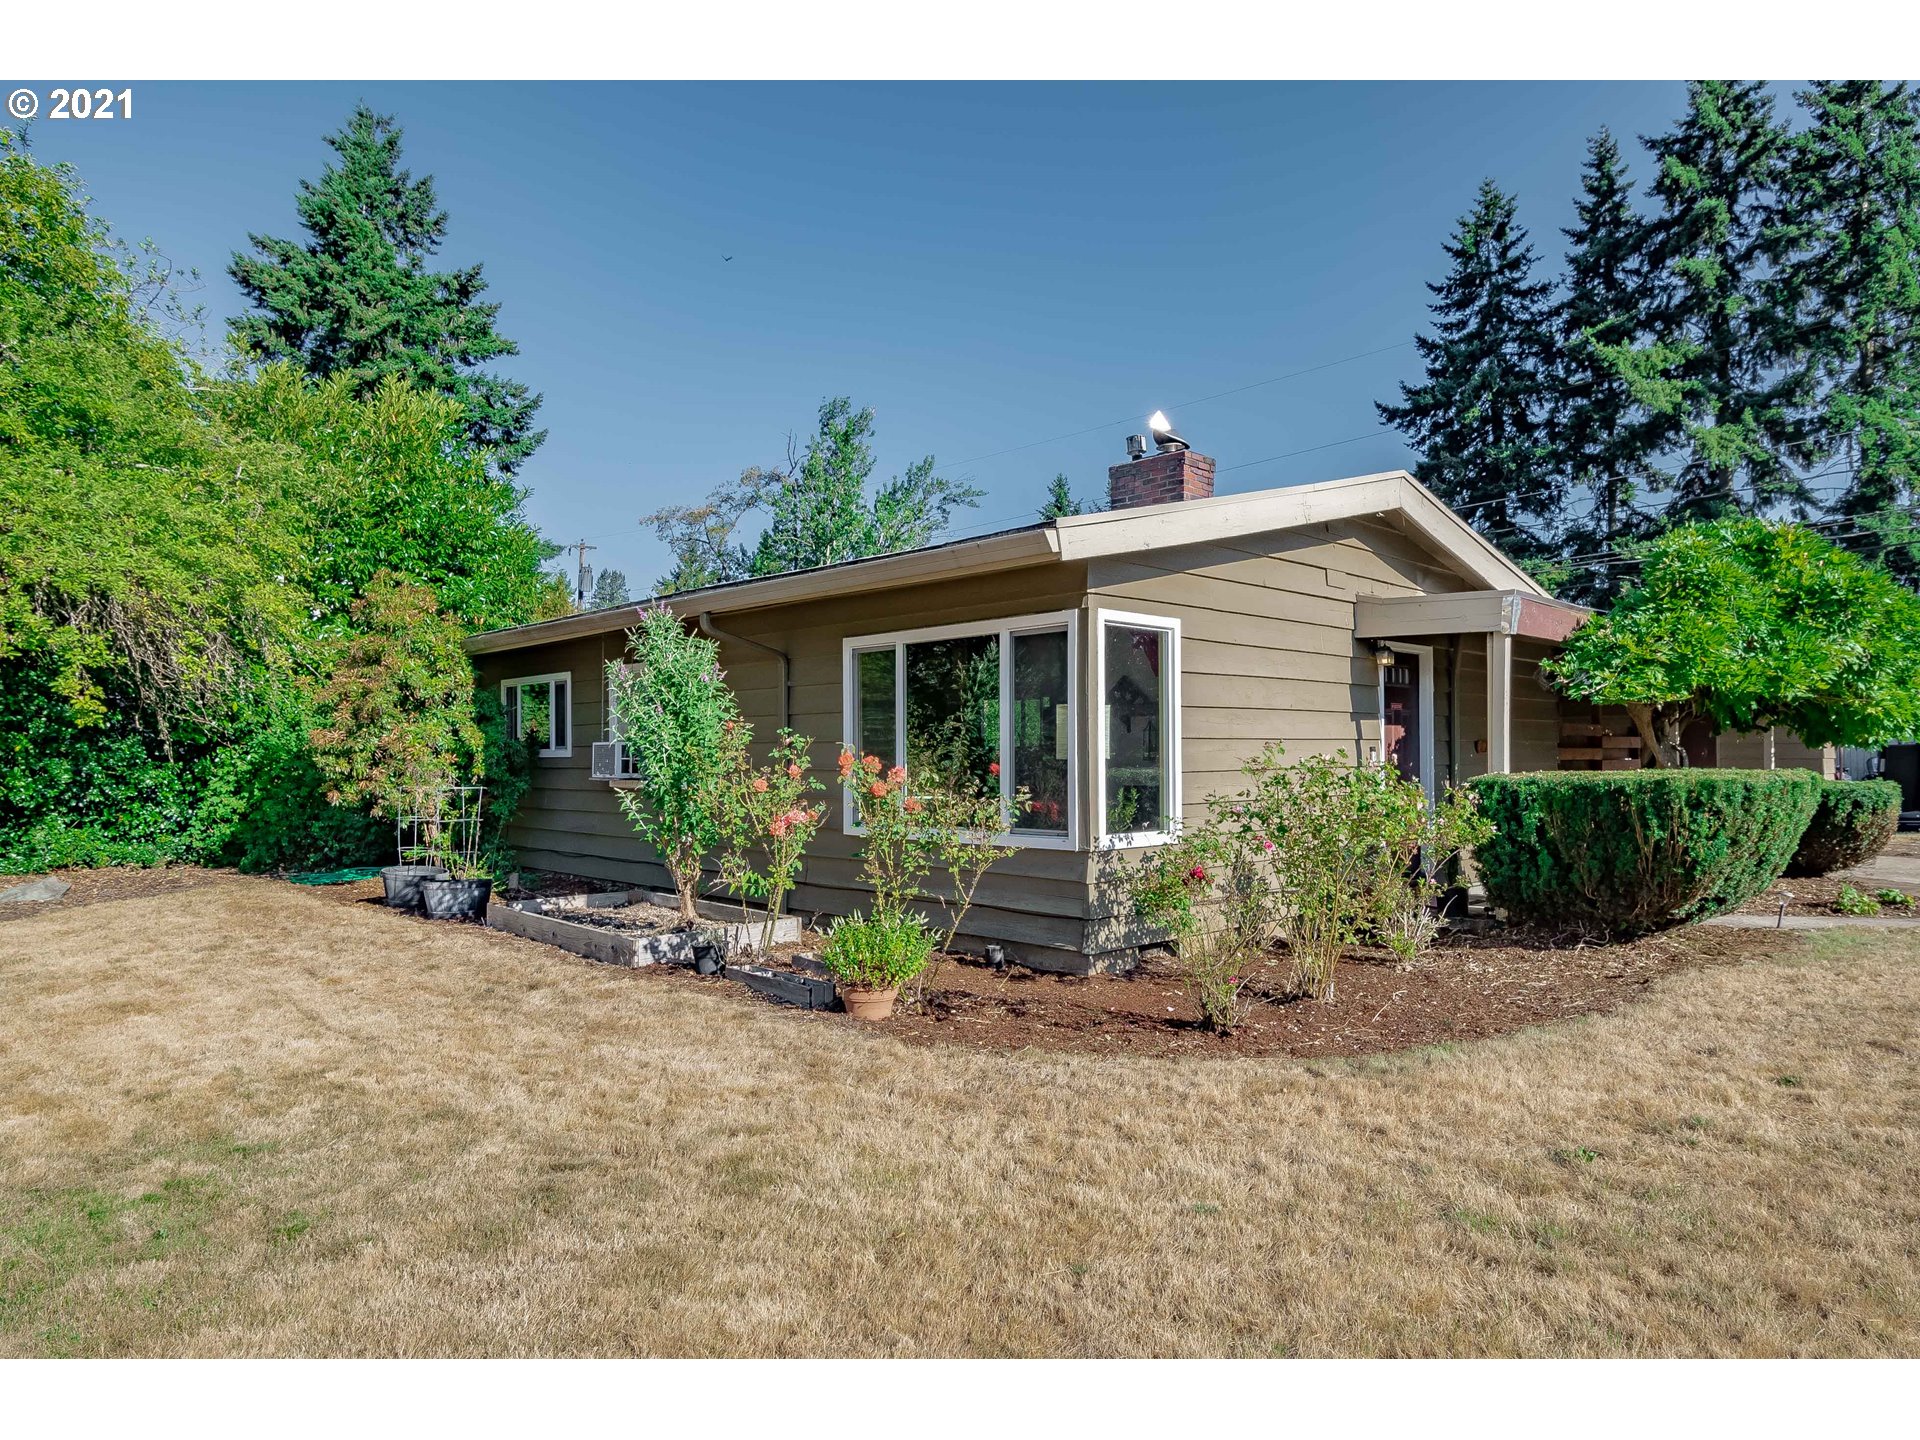 210 SE 95TH AVE (1 of 32)